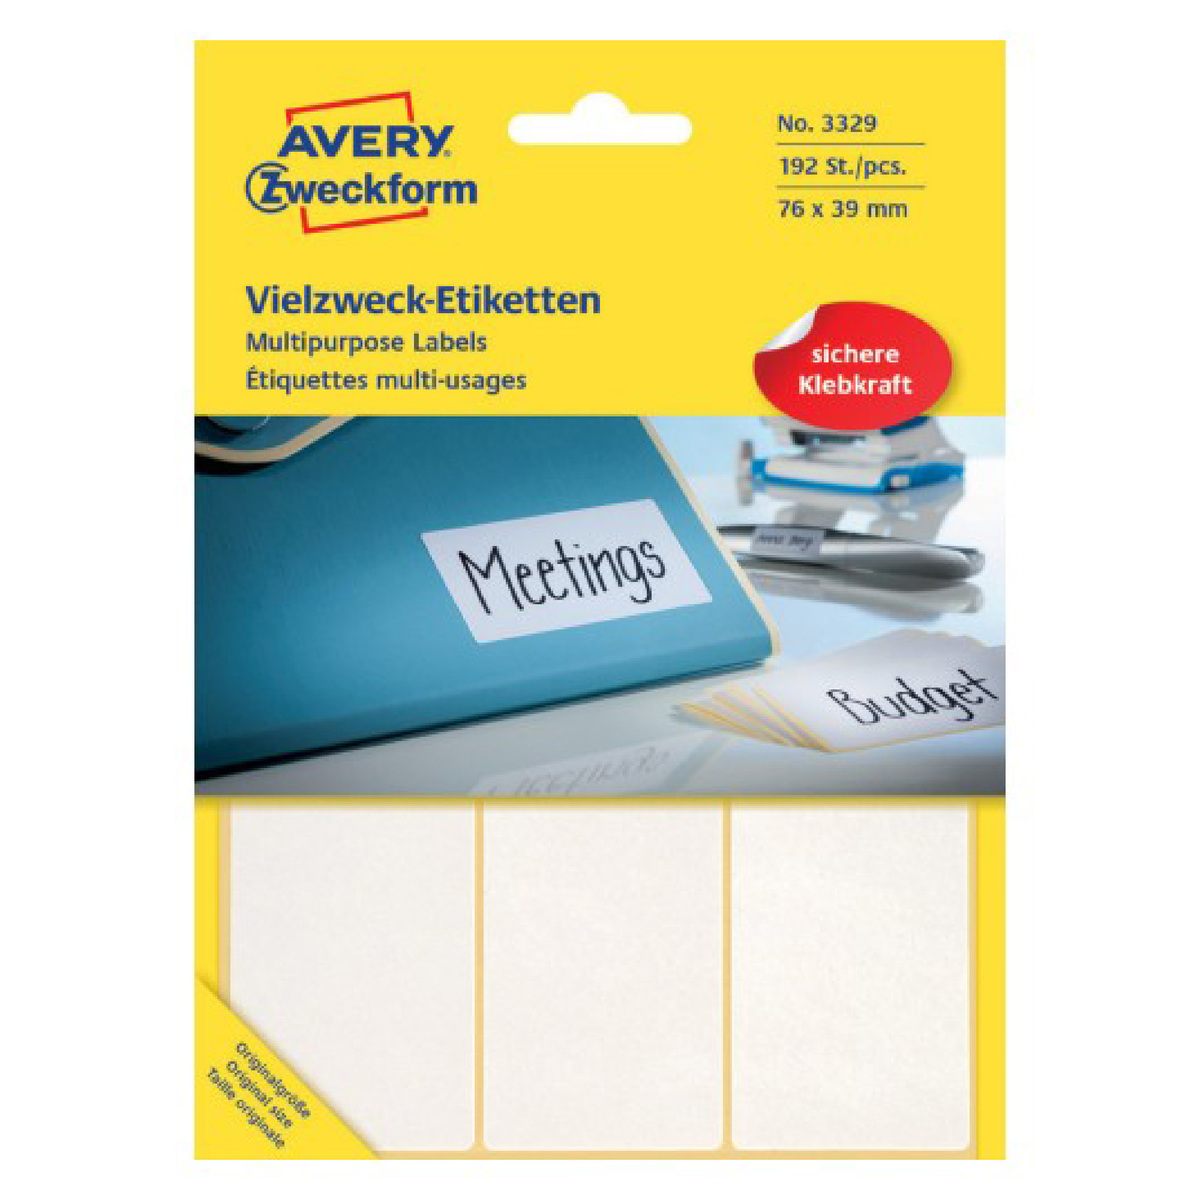 Avery 76 x 39 mm Permanent Multipurpose General-Use Labels, 192 Labels/32 Page, White, 3329